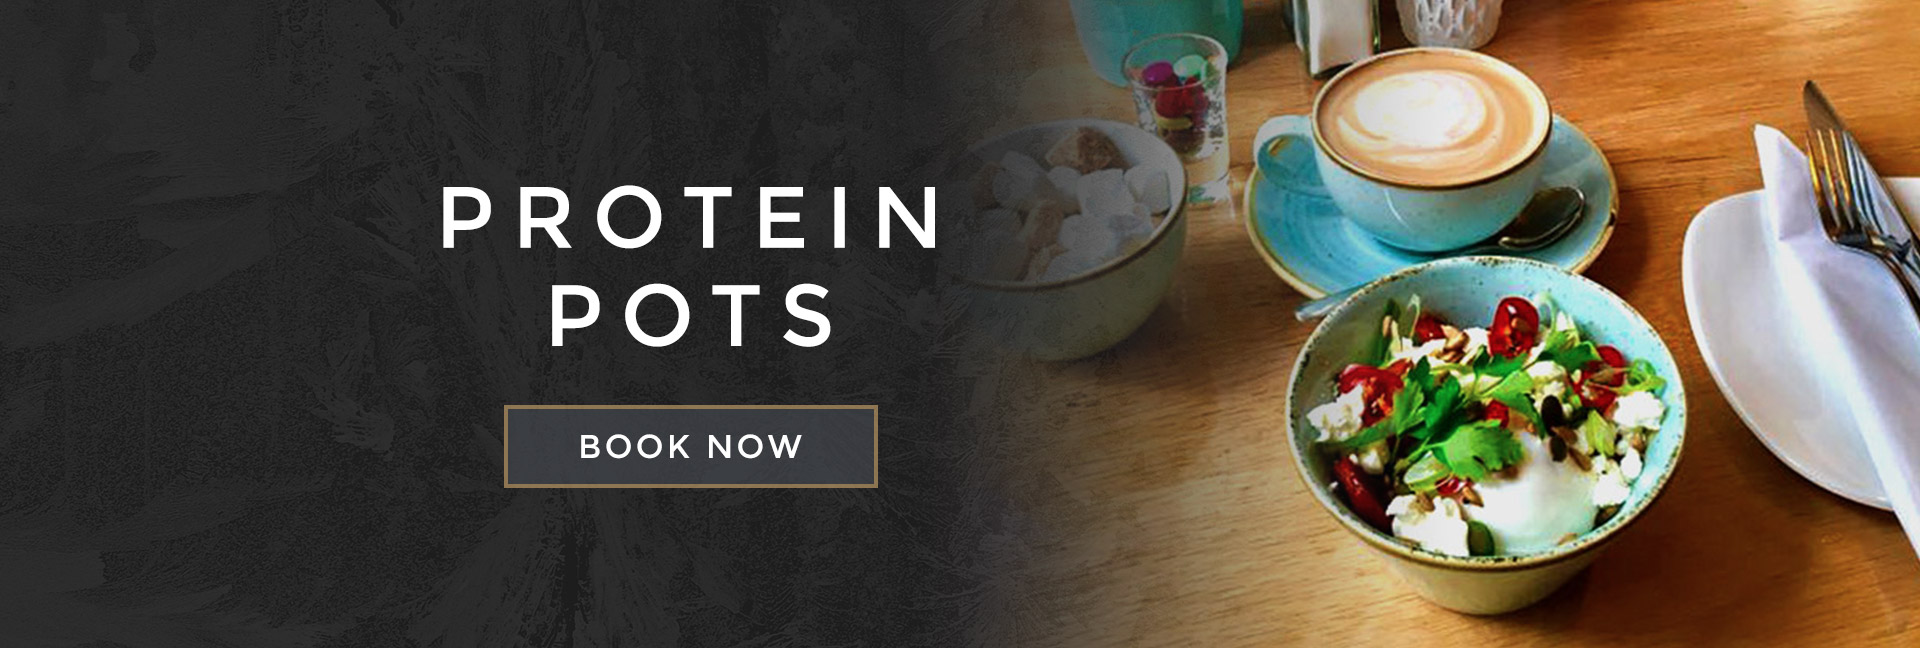 Protein pots at All Bar One Cheltenham - Book your table